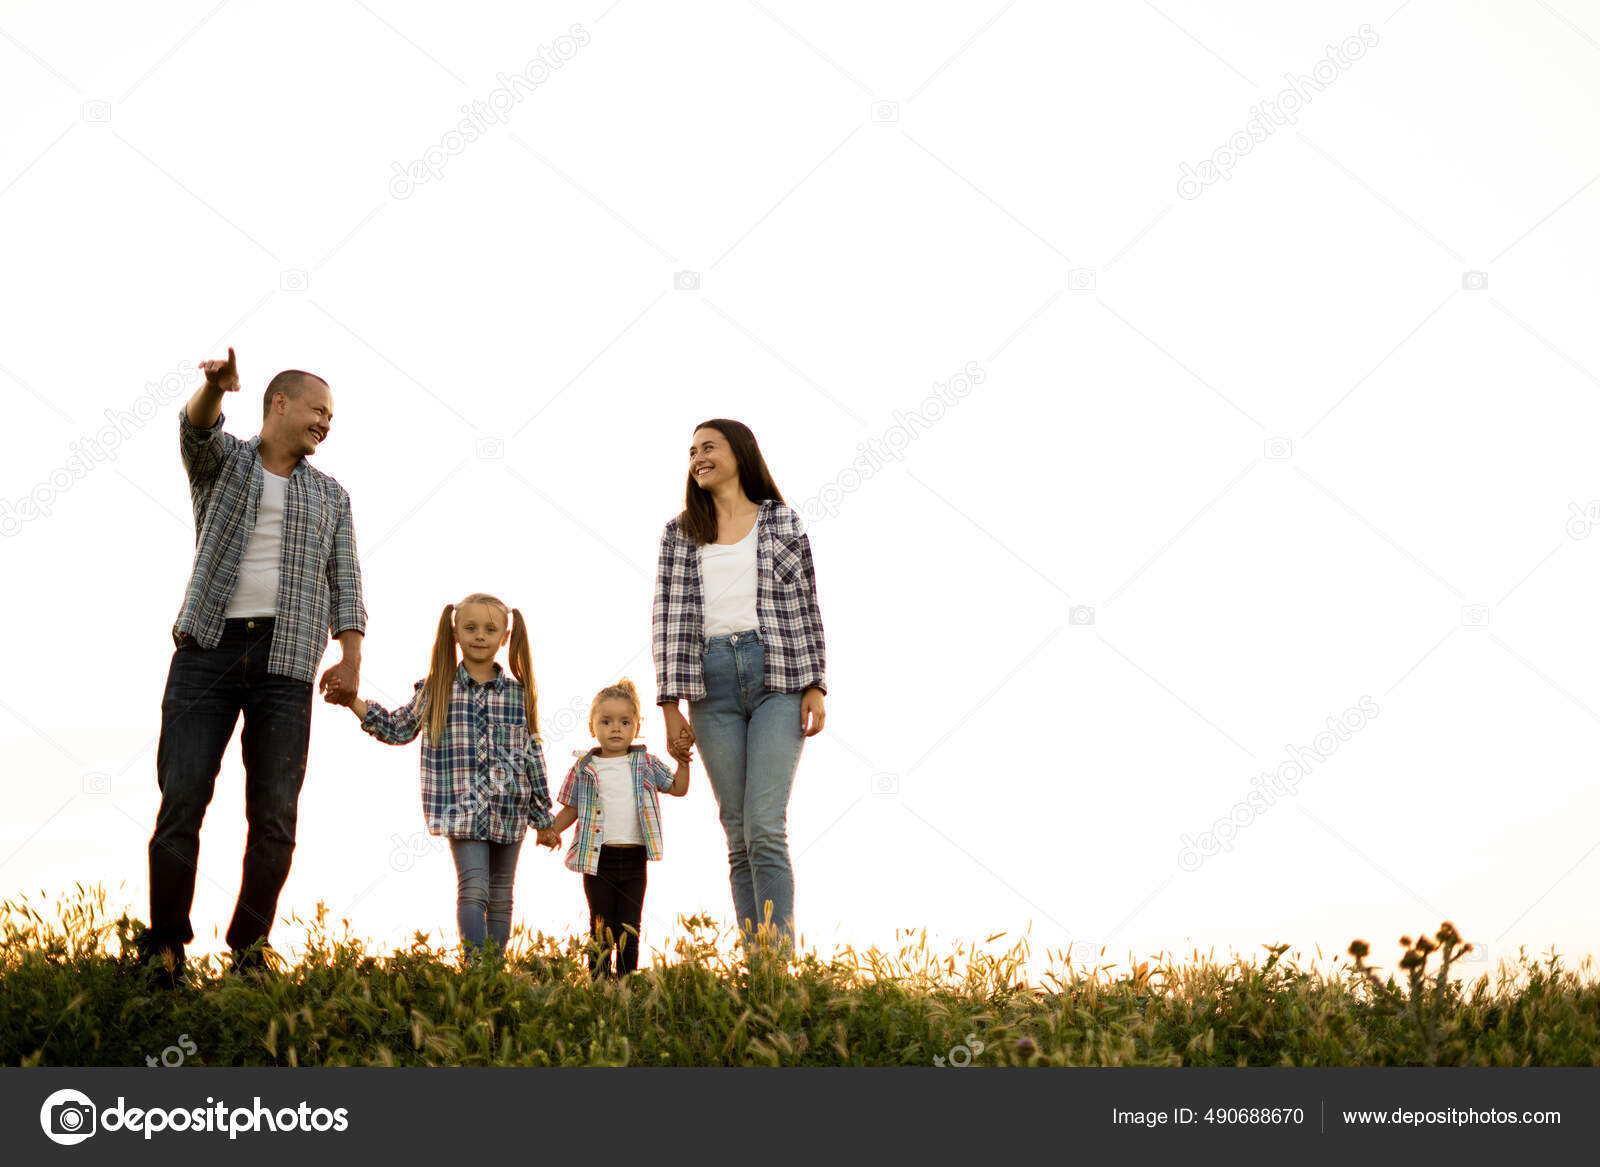 Portrait Of Happy Family Walking Over White Background Against